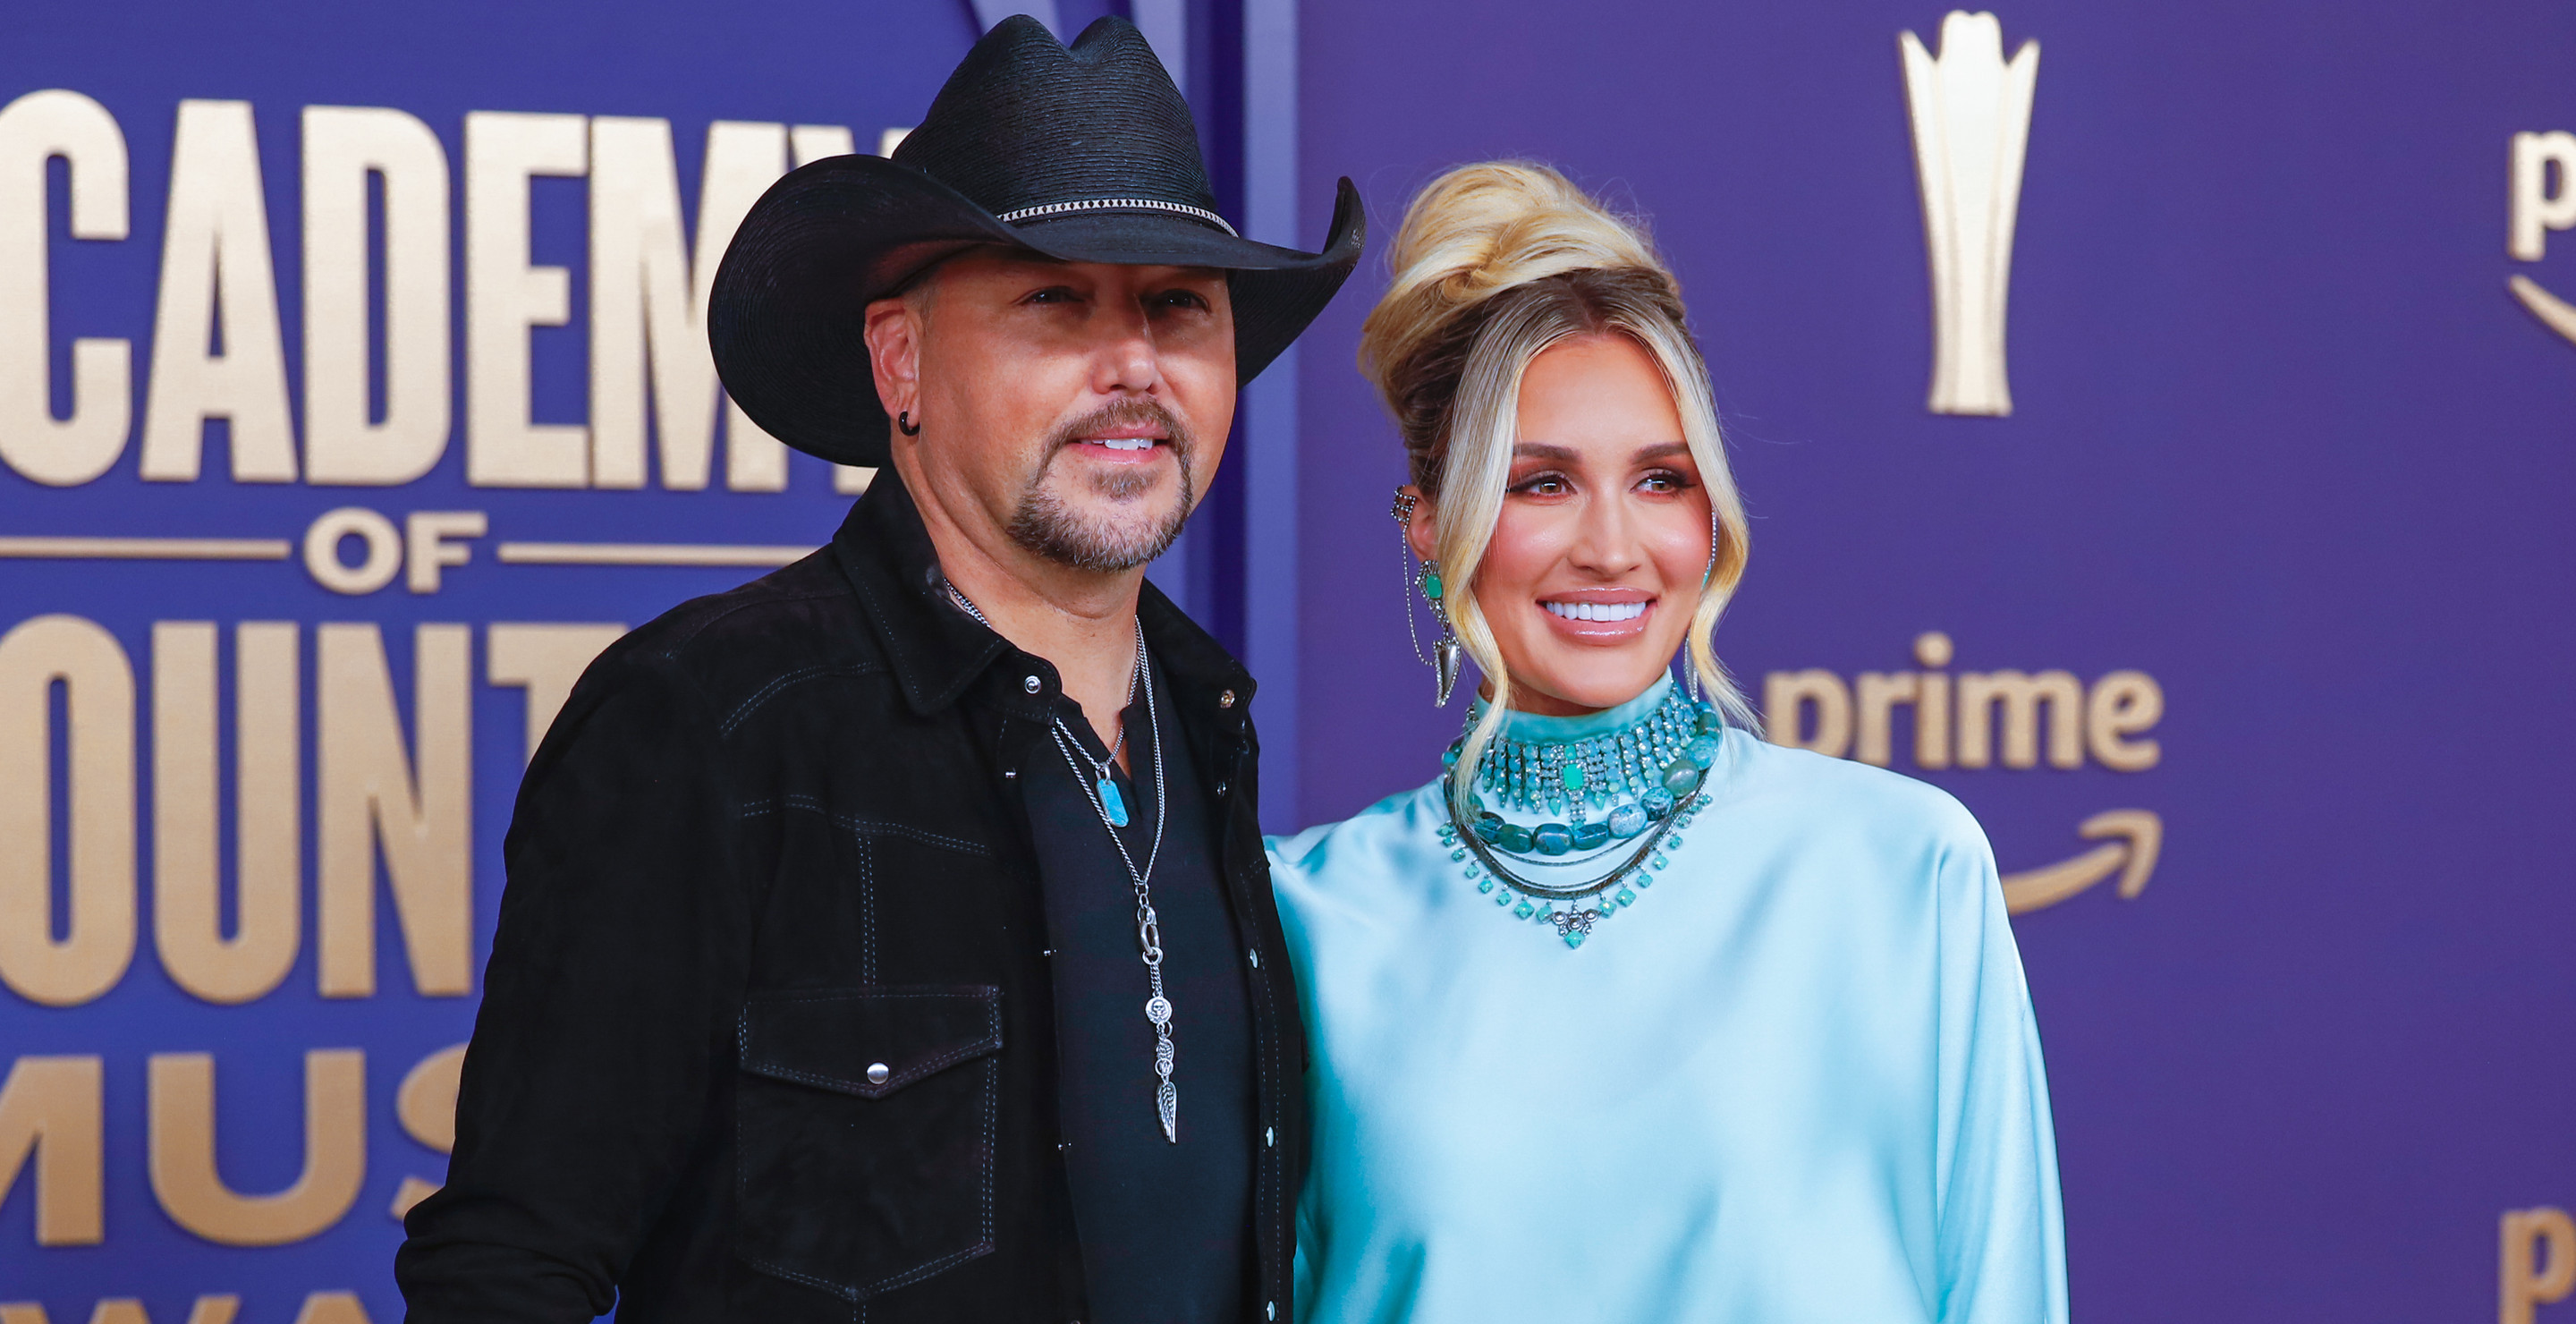 Jason Aldean Breaks Silence About Brutal Injury That Sent Wife To The ER